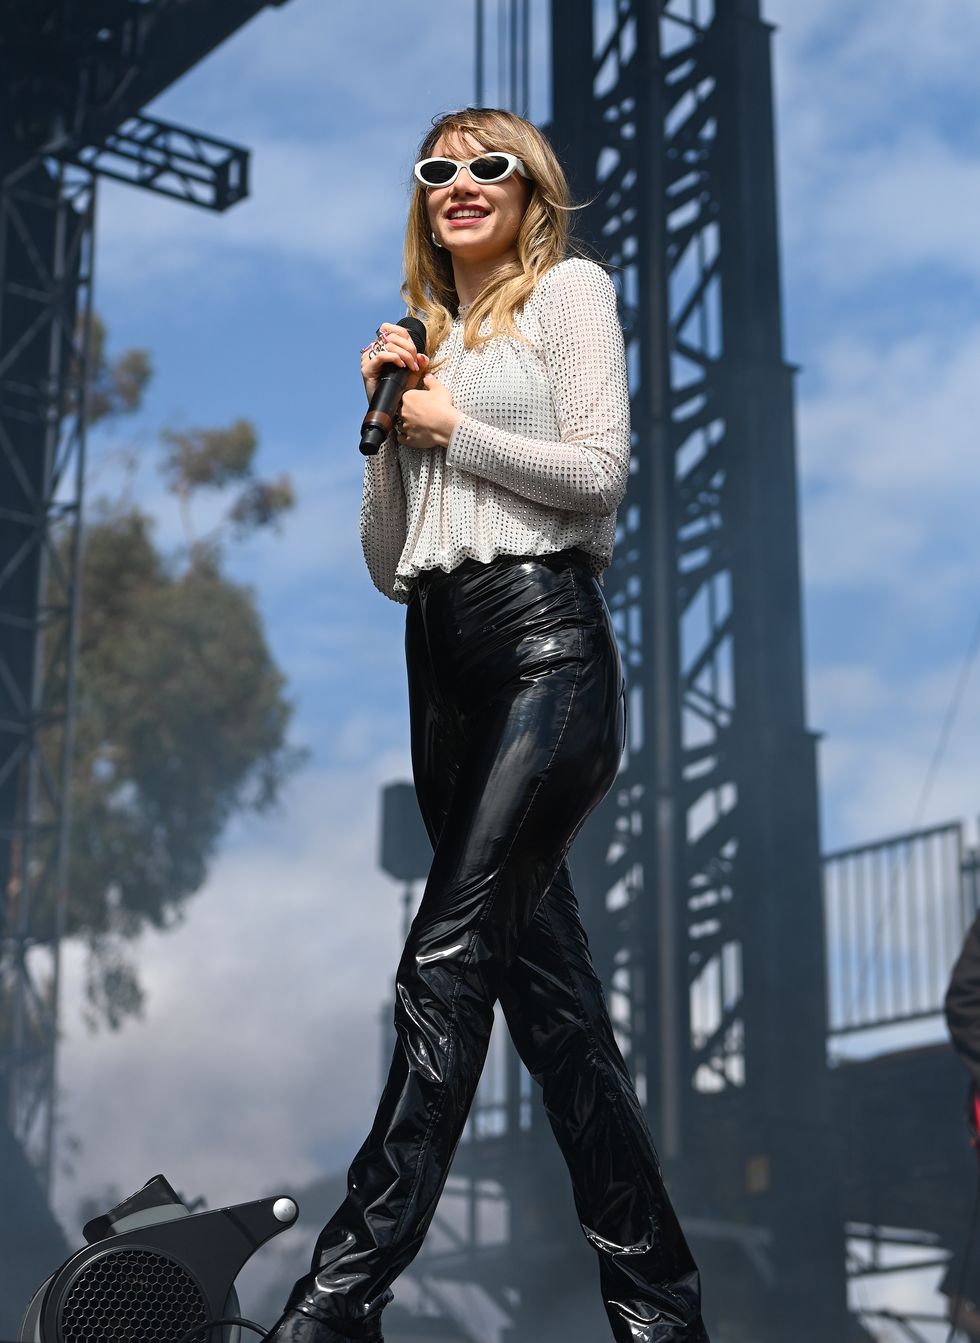 suki waterhouse performs onstage at the 2023 ohana festival held at doheny state beach on october 1, 2023 in dana point, california photo by gilbert floresbillboard via getty images